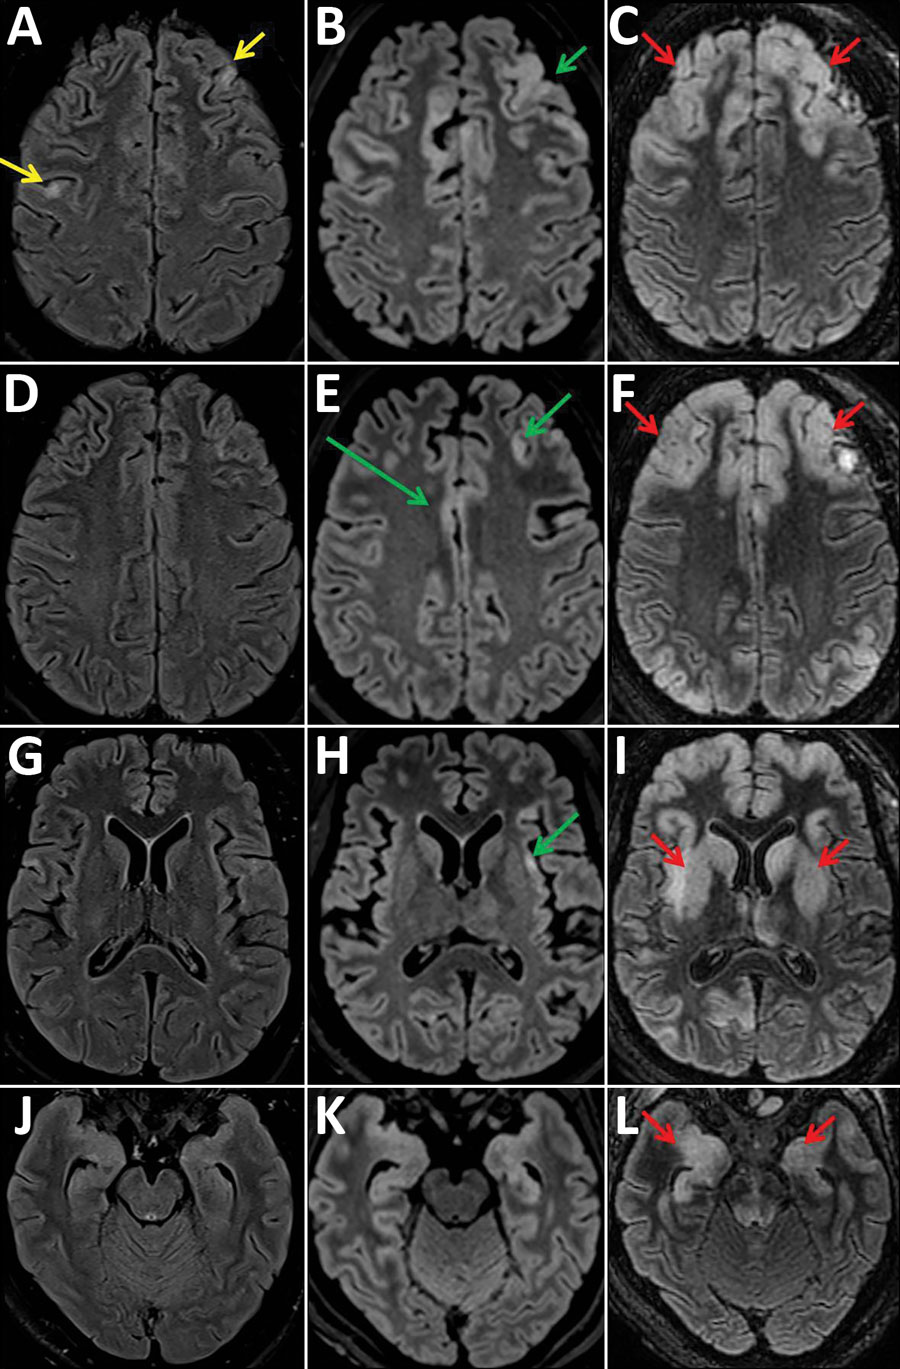 Fluid-attenuated inversion recovery images of magnetic resonance examinations of the brain in a 28-year-old woman from Romania with untreated AIDS and measles inclusion-body encephalitis. Images were taken 1 week (A, D, G, J), 2 weeks (B, E, H, K), and 5 weeks (C, F, I, L) after hospital admission, at the same brain levels. The first examination shows focal cortical hyperintensities (yellow arrows) in the left and right frontal cortex. After 2 weeks, these cortical hyperintensities have widened 